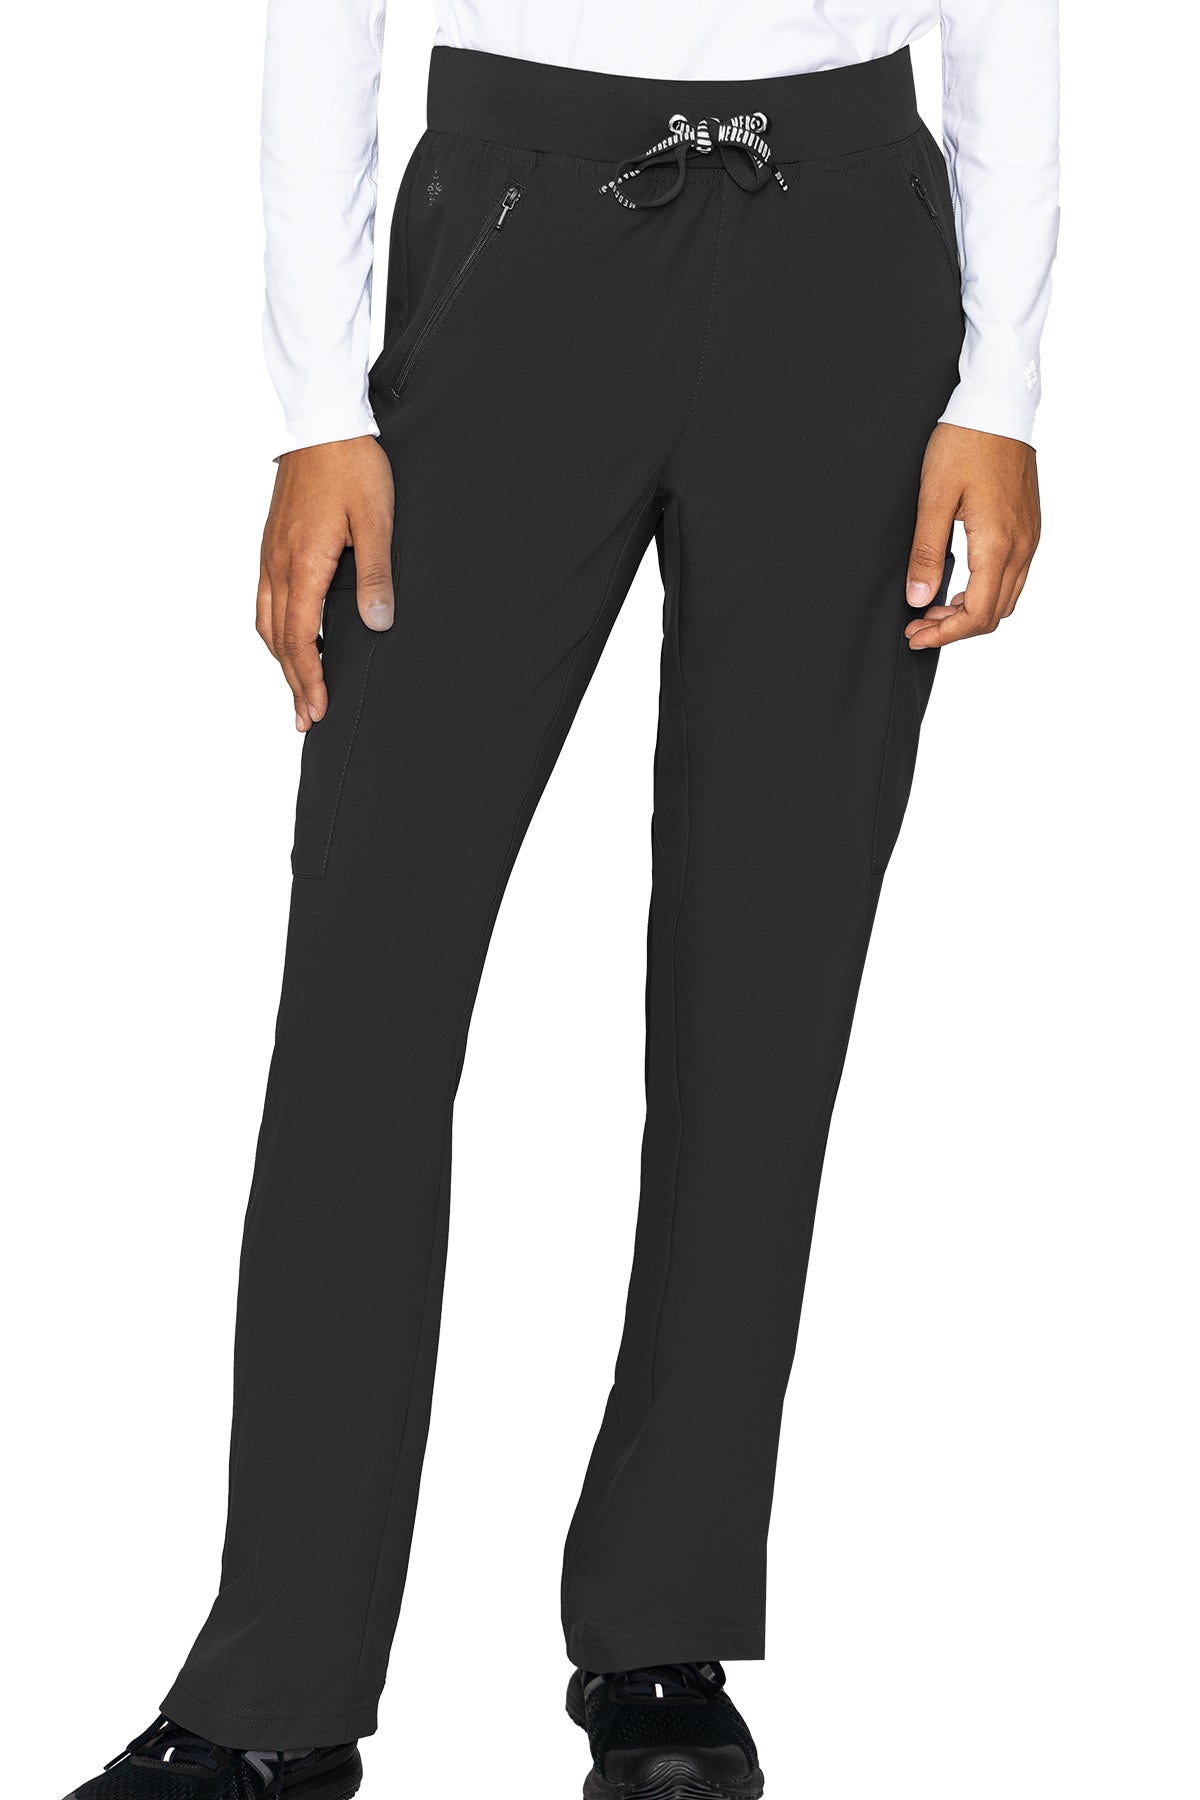 Med Couture Petite Scrub Pants Insight Zipper Pocket Pant in Black at Parker's Clothing and Shoes